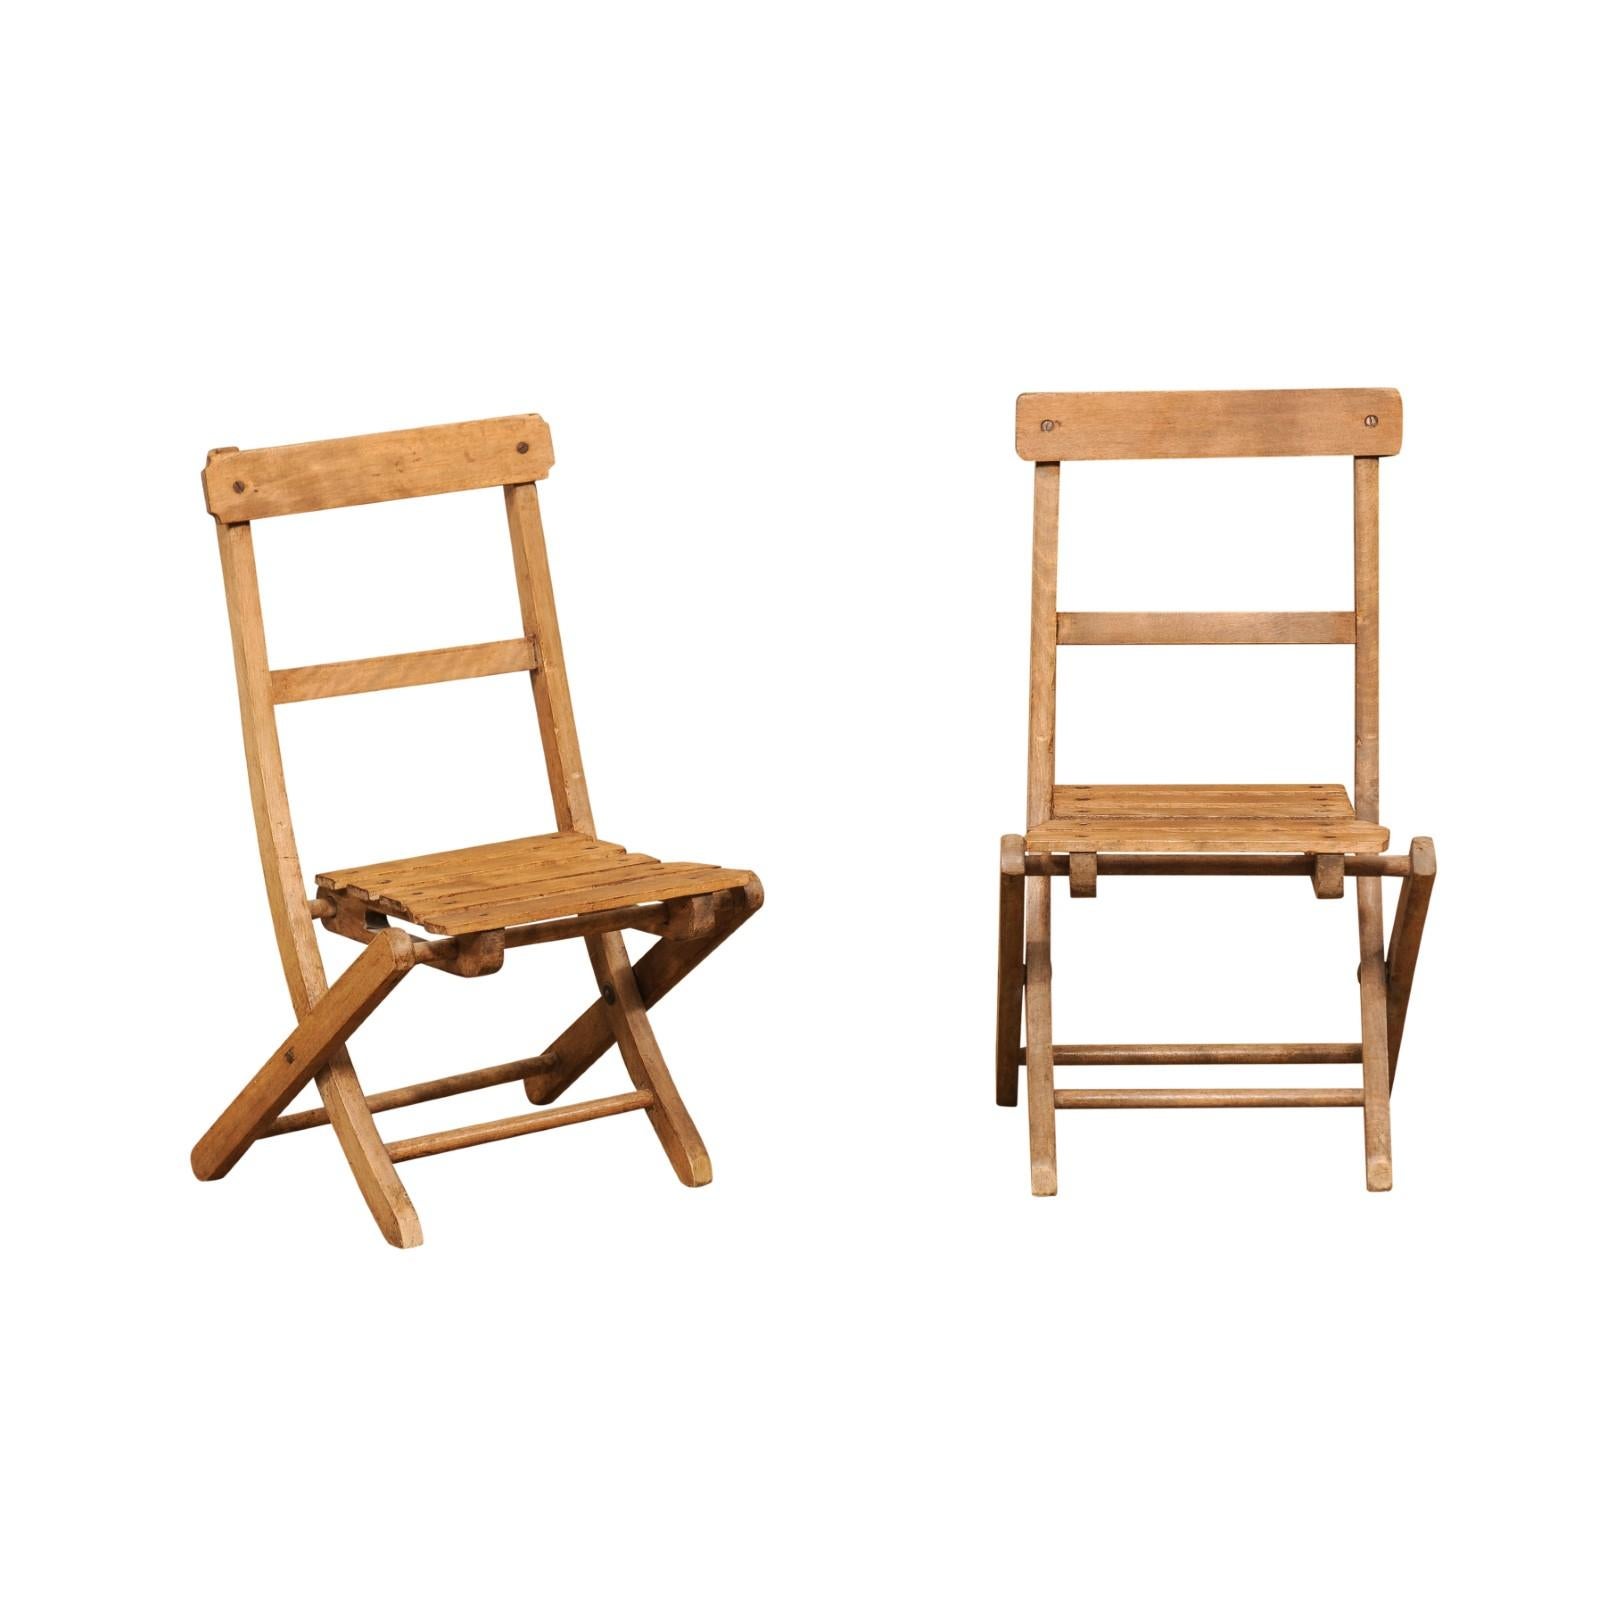 Two small rustic English wooden children's folding chairs from the 20th century, with slatted seats, open backs and side stretchers, priced and sold $295 each. Created in England during the 20th century, these two children's chairs charm us with